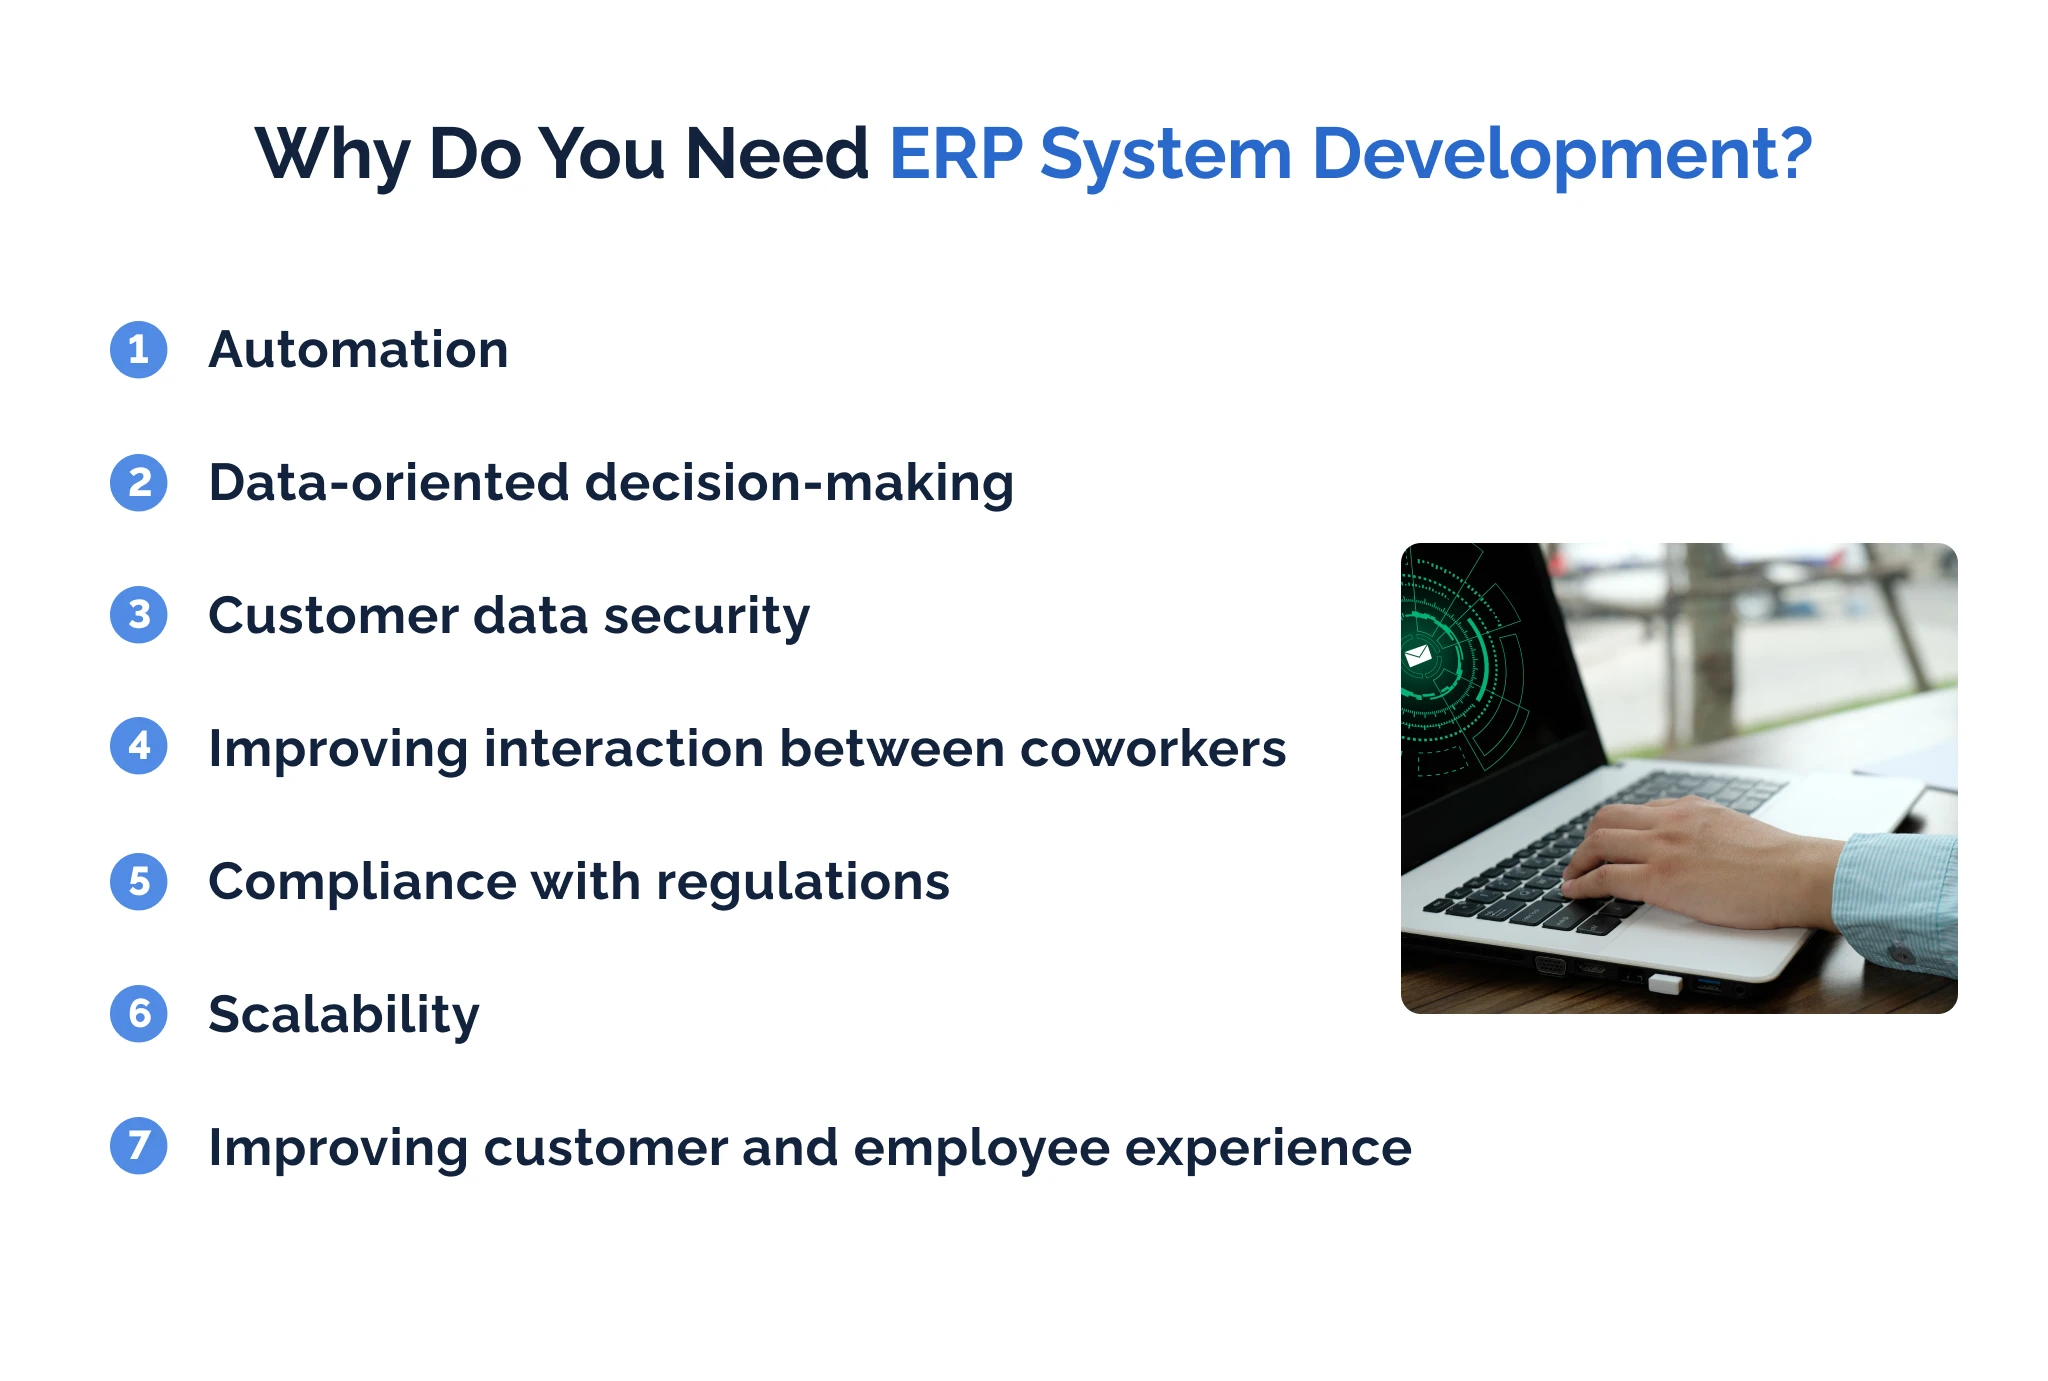 Why do you need ERP system development?